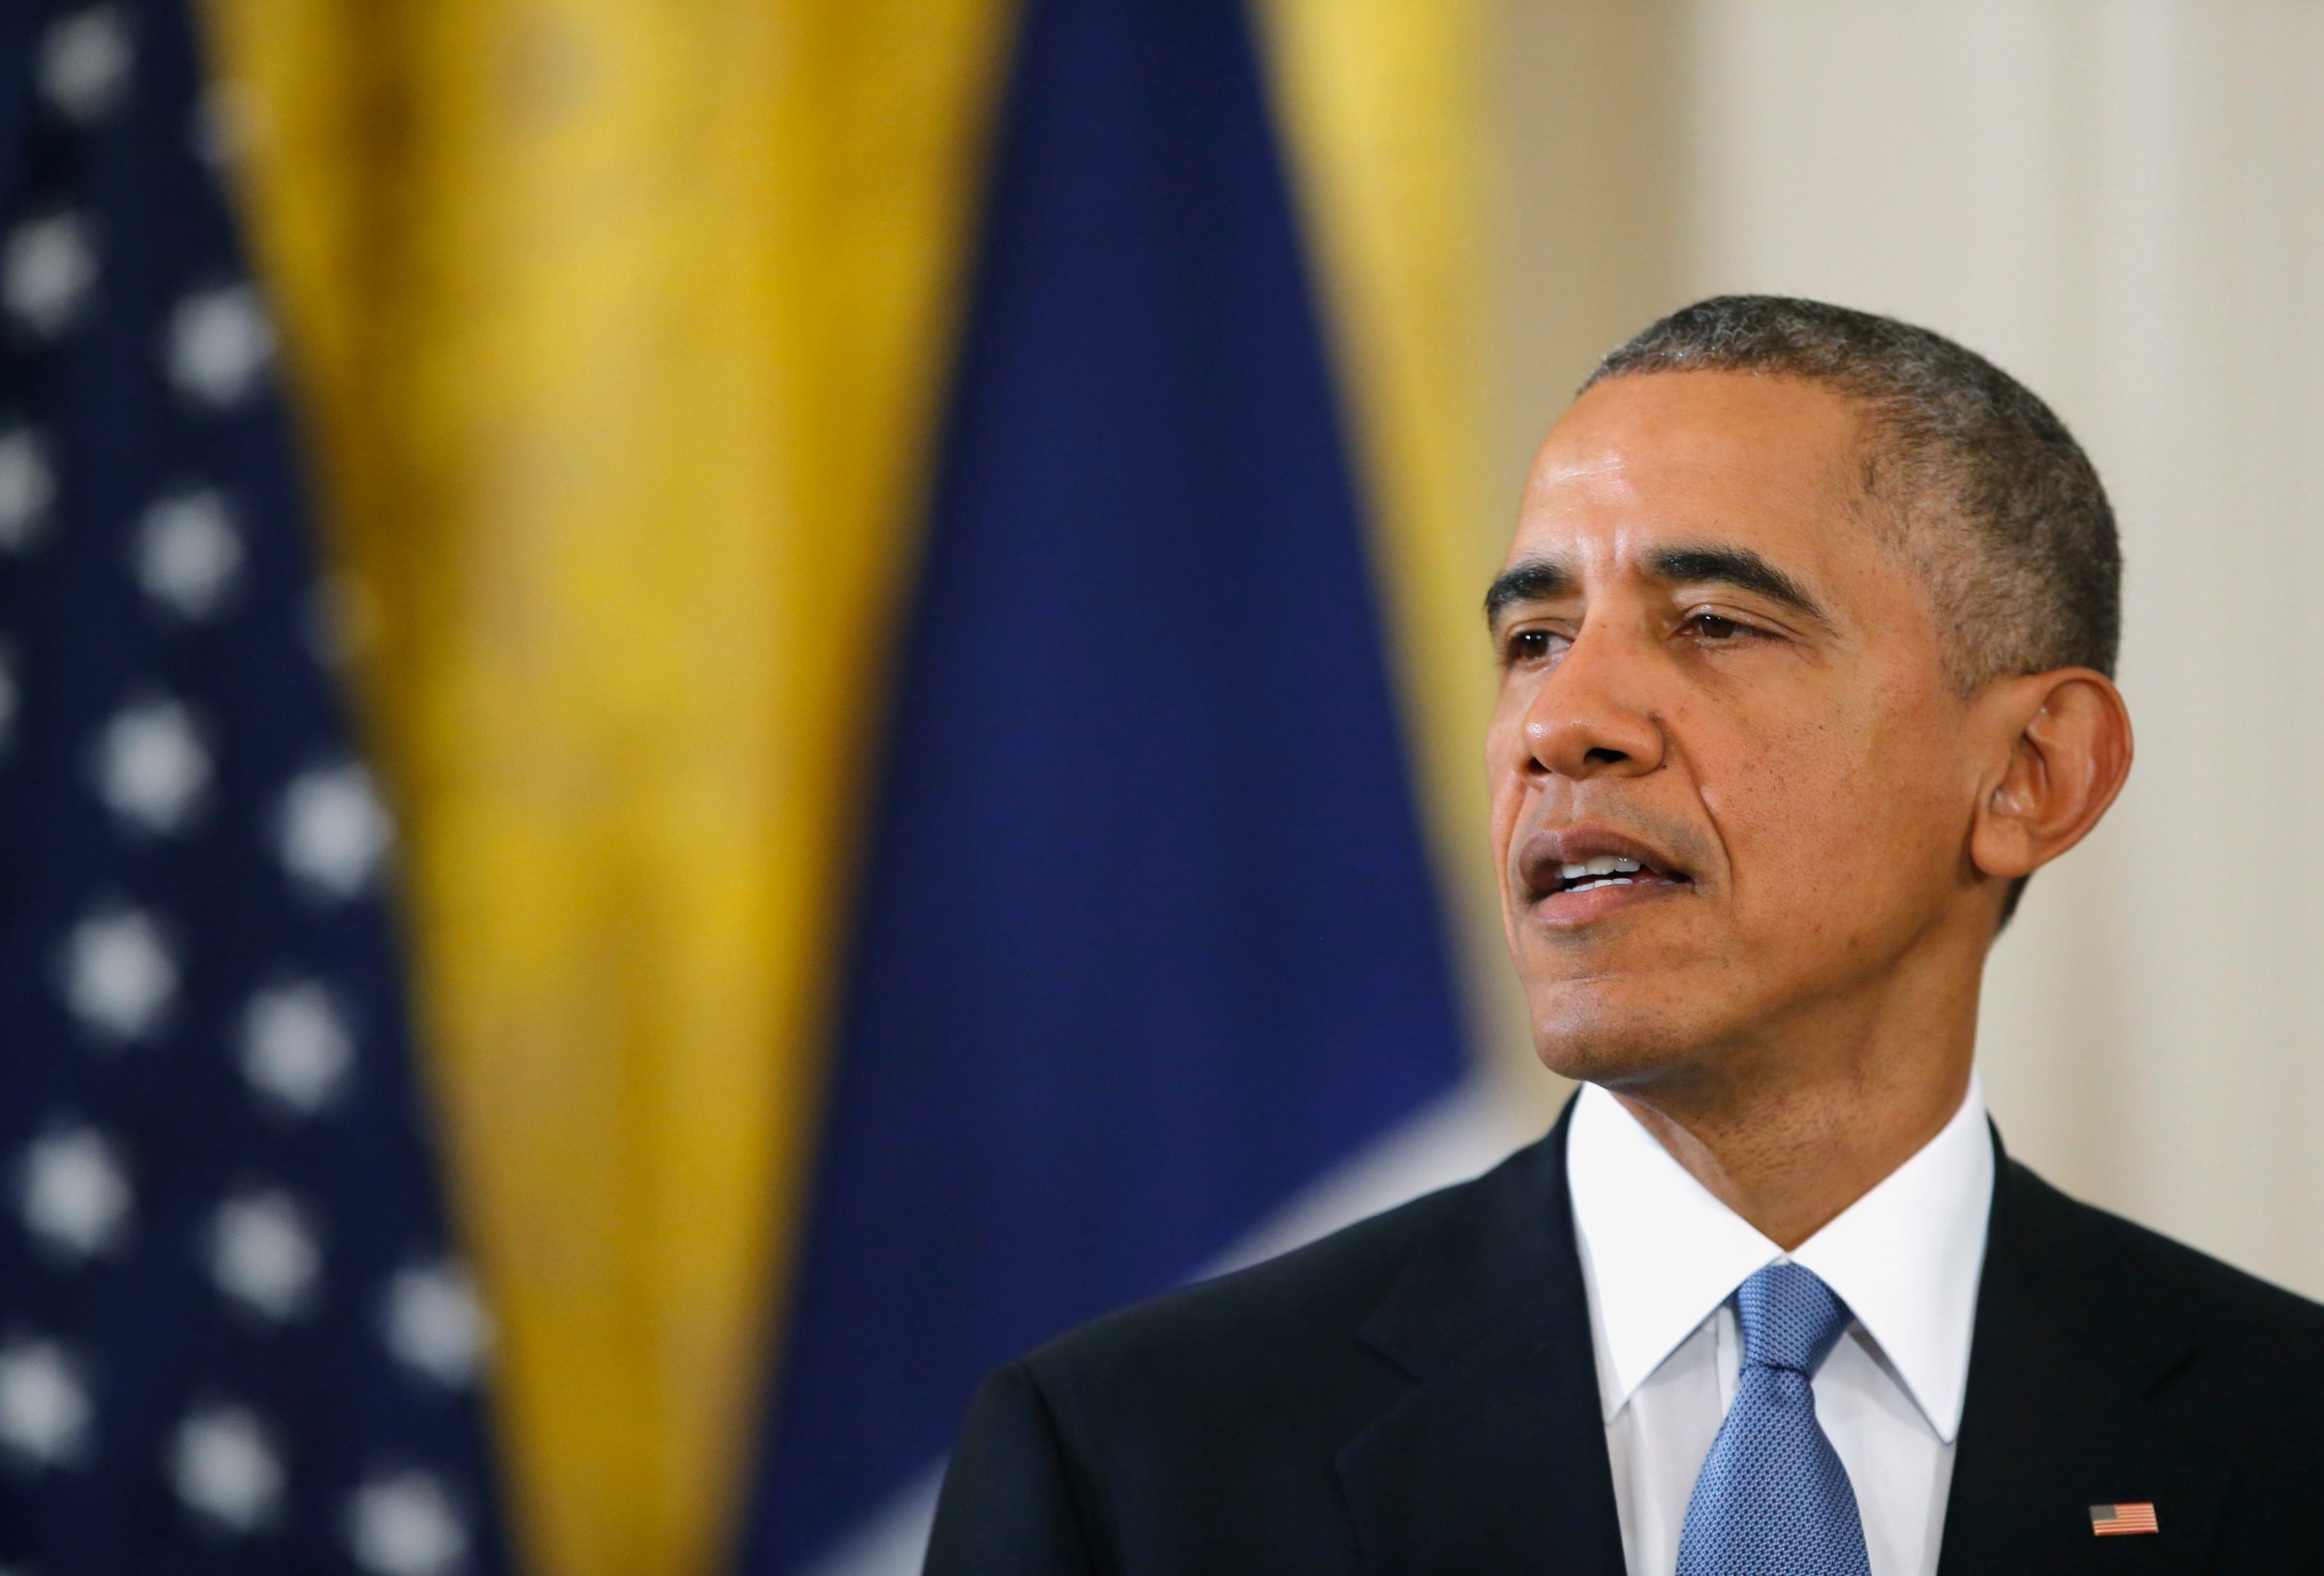 U.S. President Obama faces joint news conference at the White House in Washington